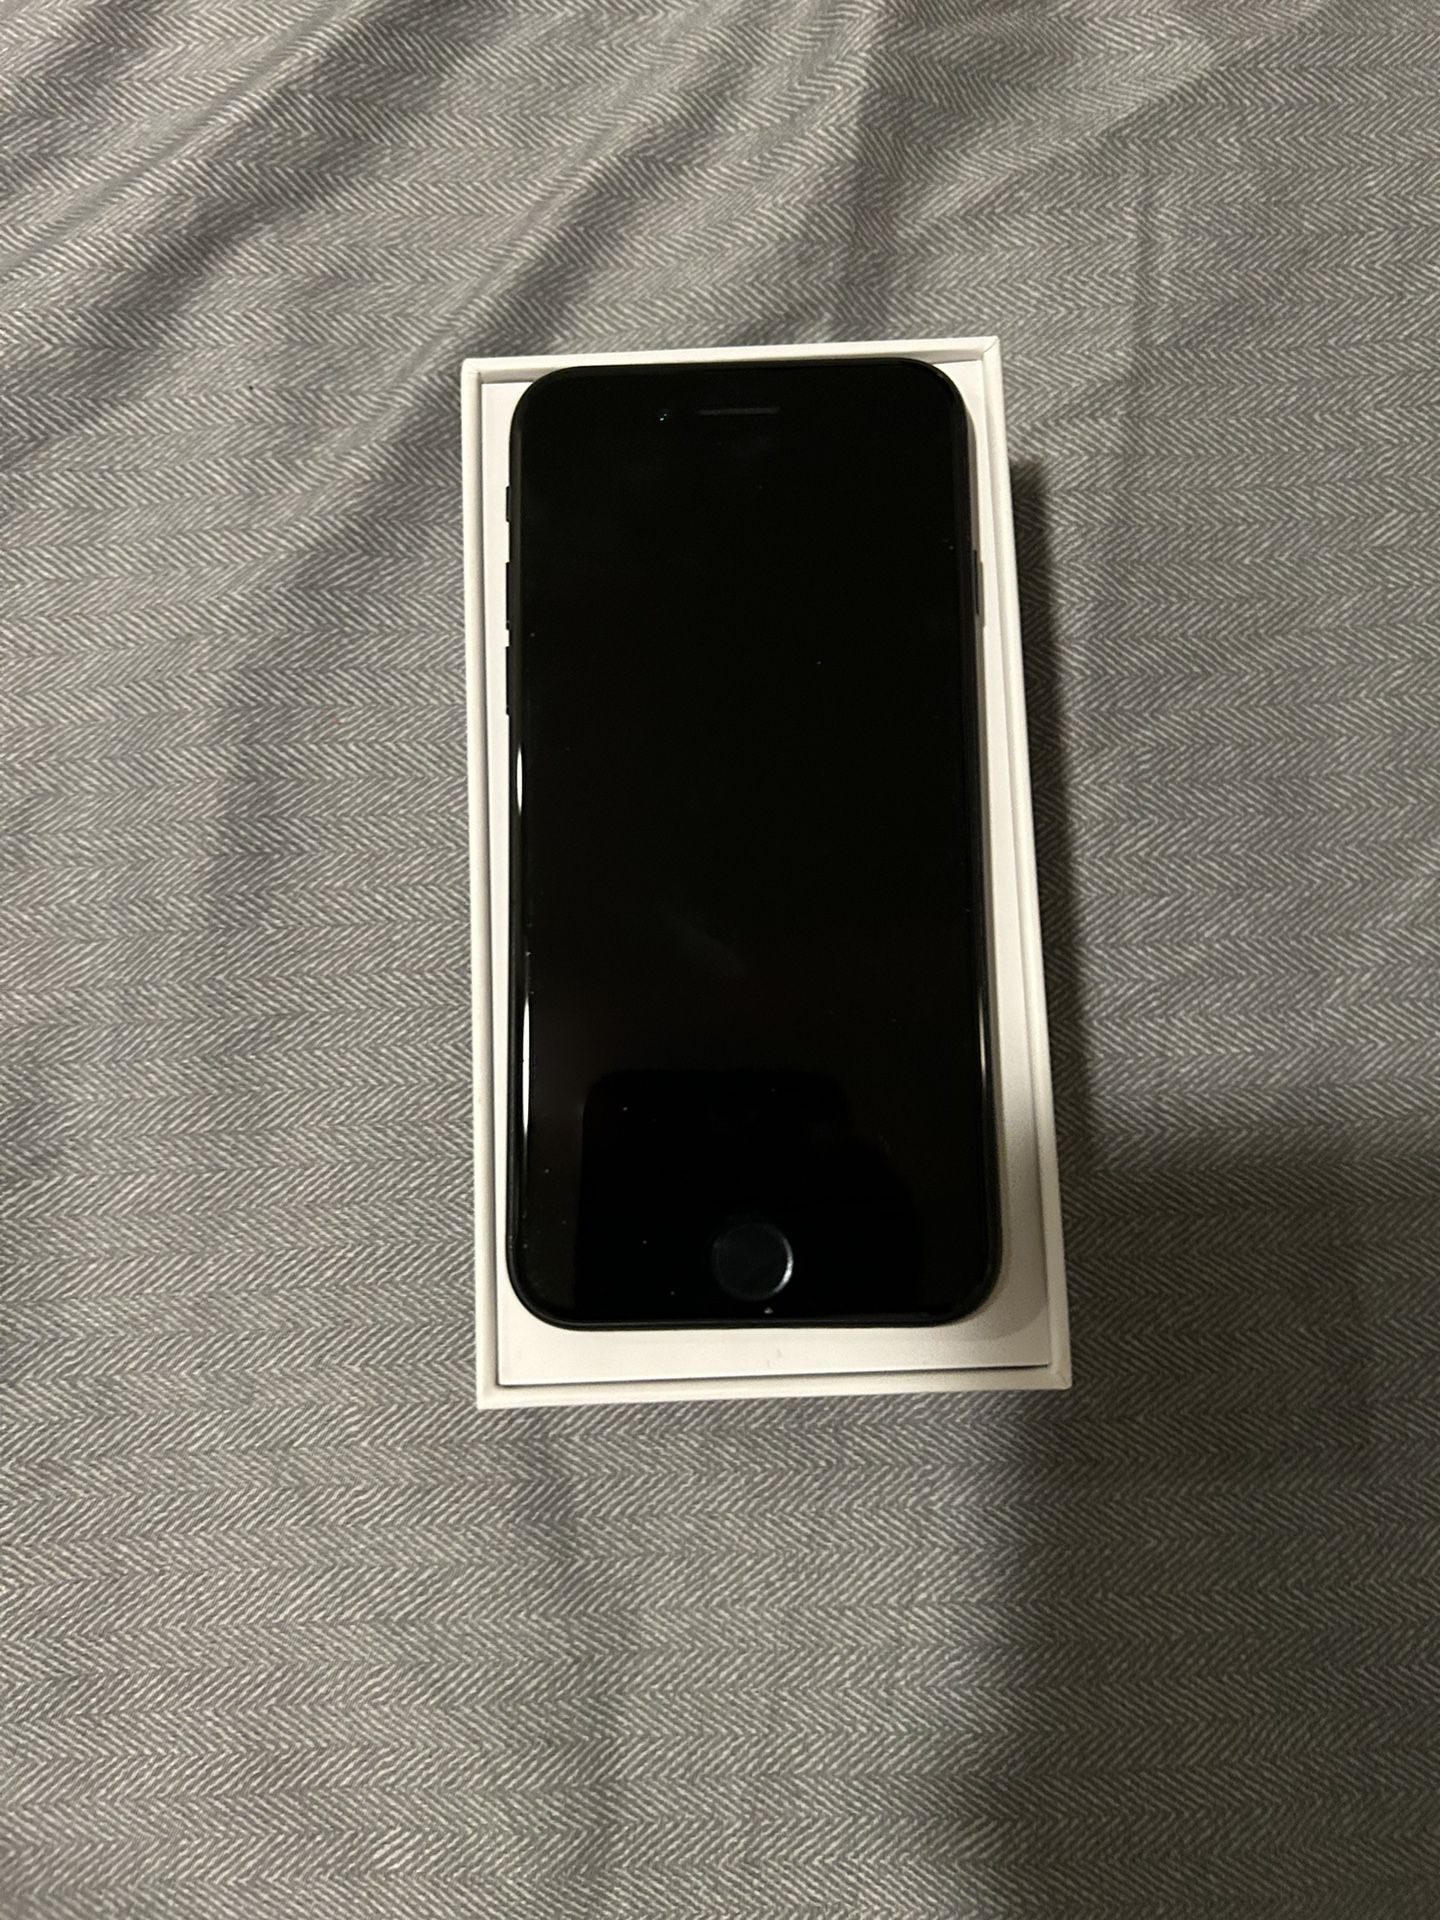 iPhone SE (used) Second Gen 